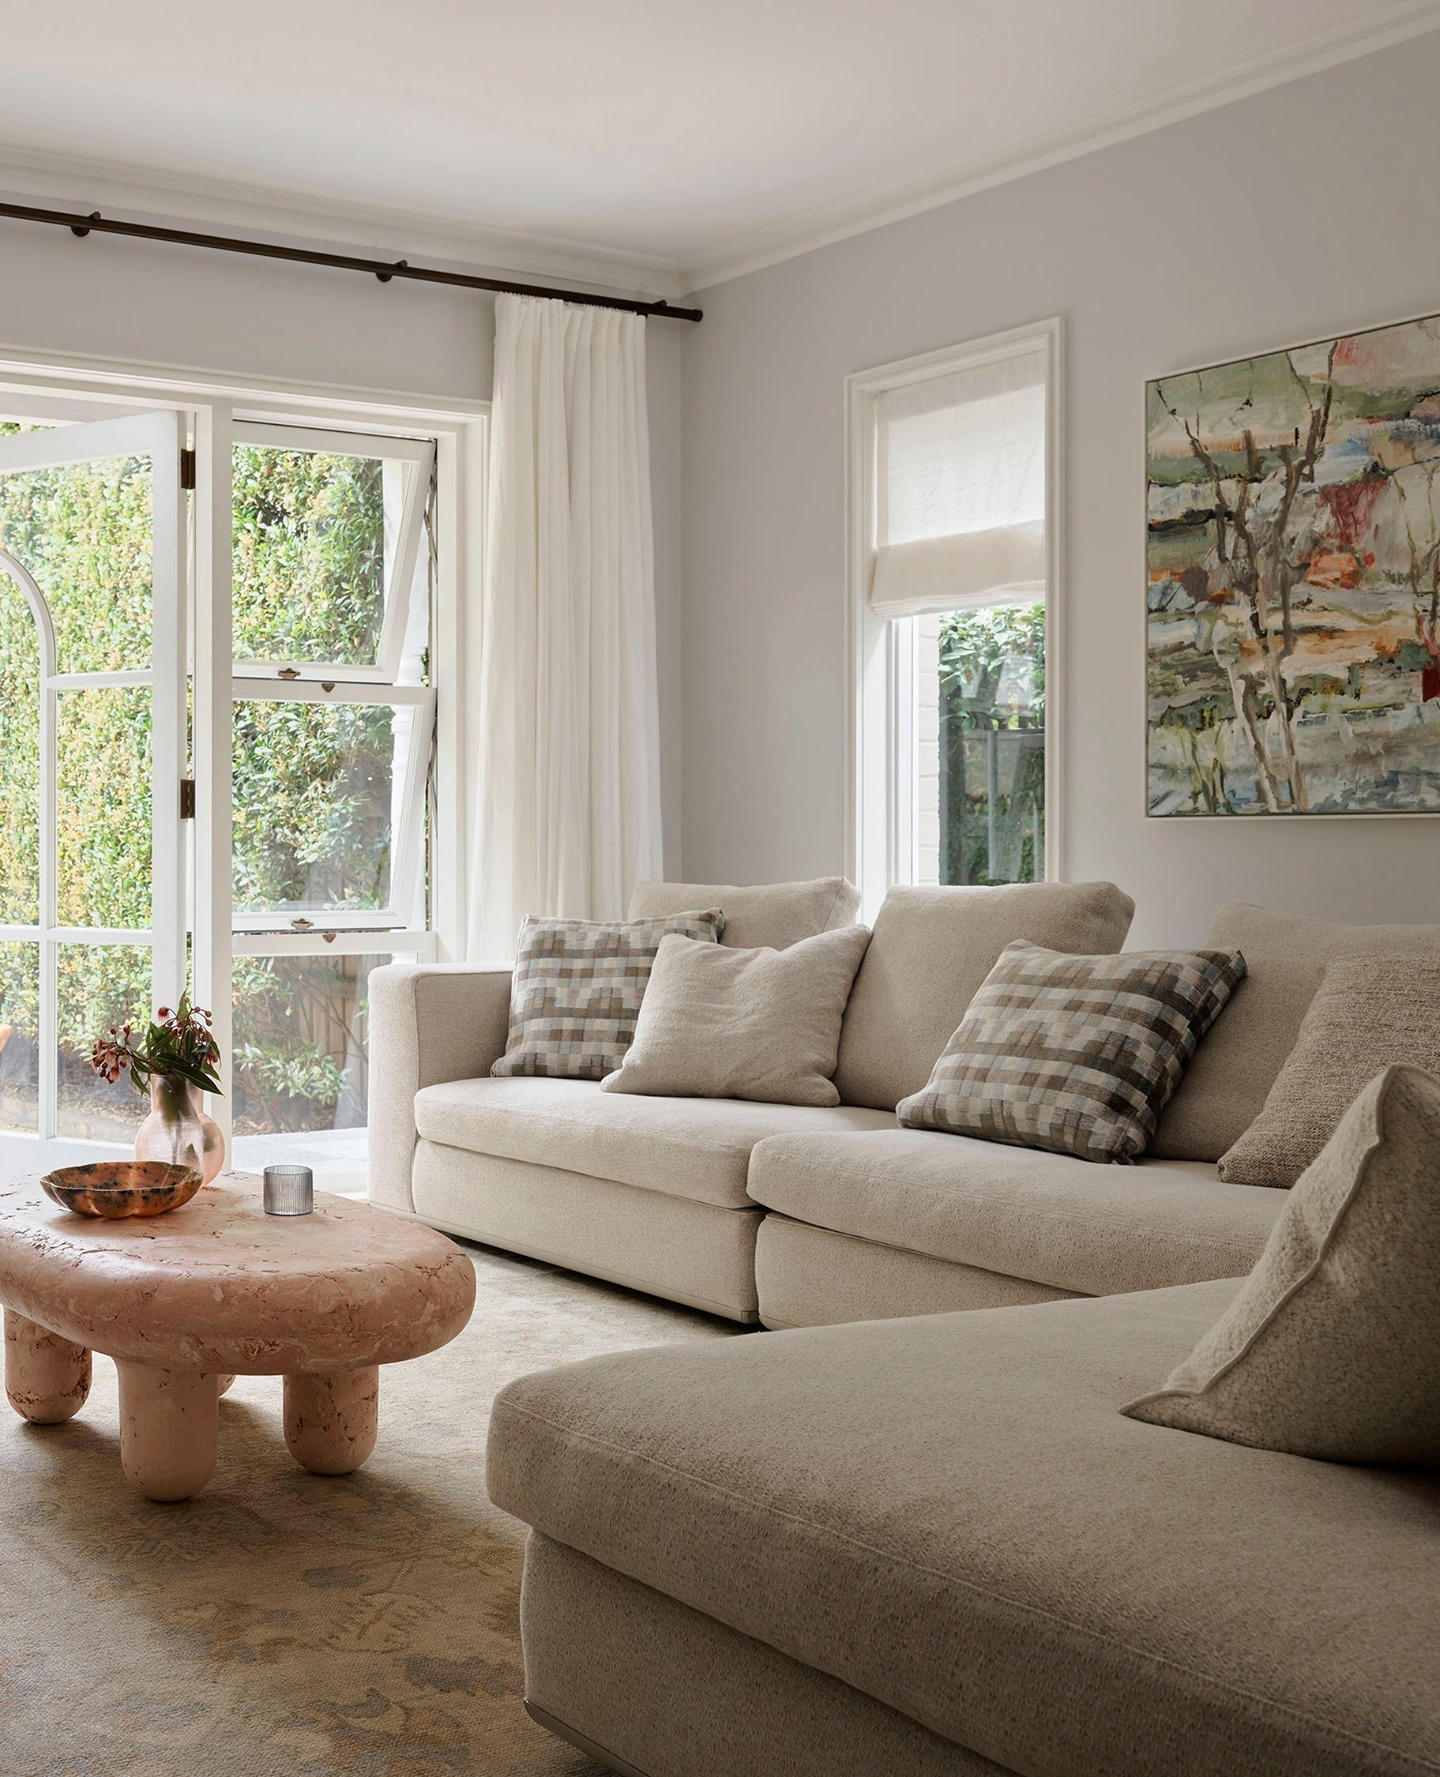 image  1 Arent&Pyke - The elegant light filled living room of our #arentpykestdio Darley House project